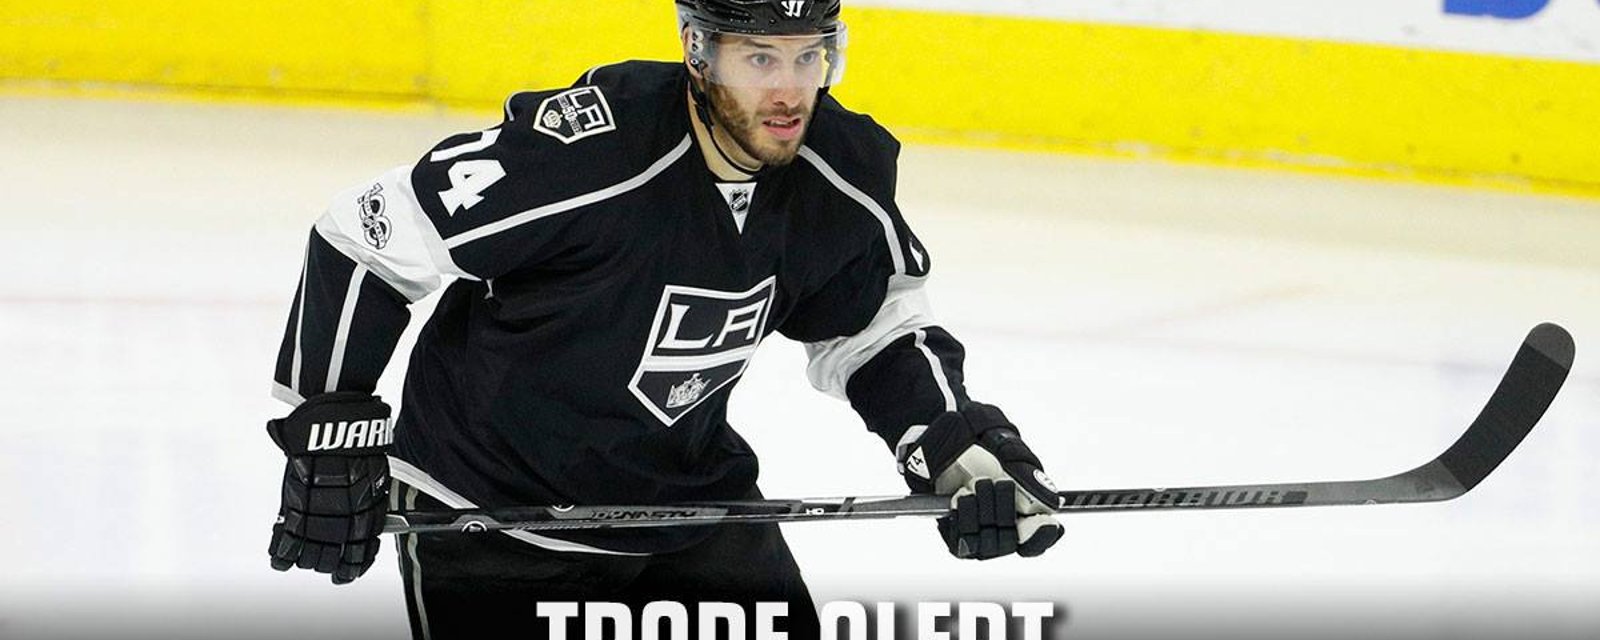 Trade Alert: Dwight King has been traded.